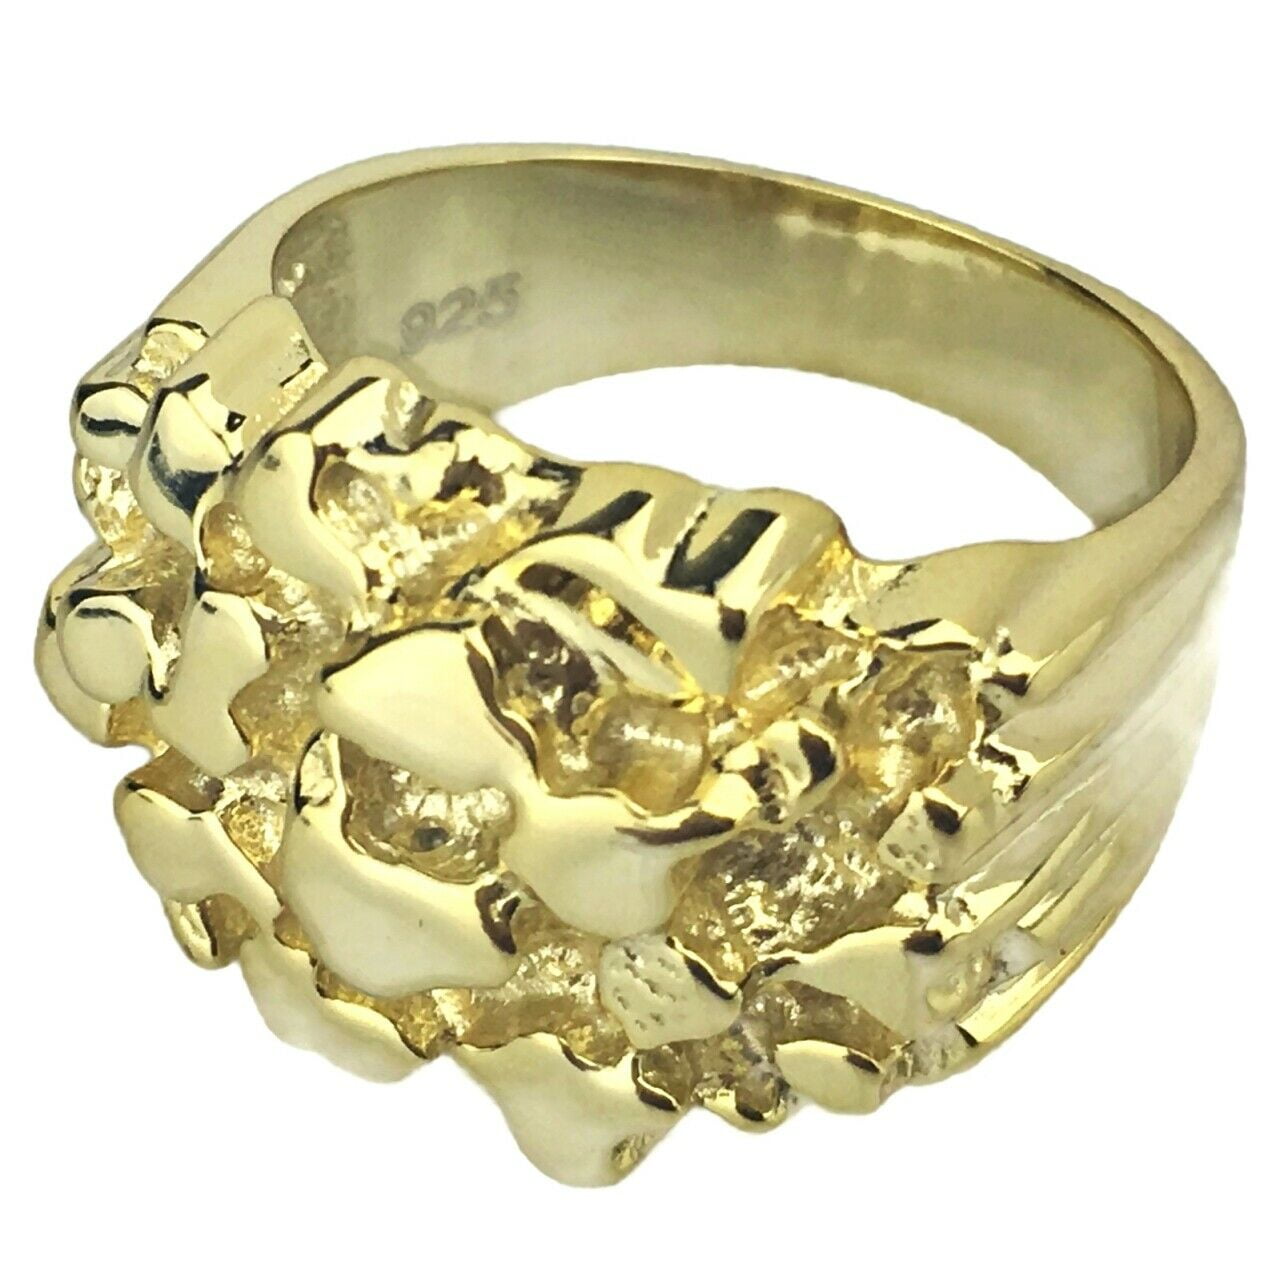 Size Z Genuine 9ct 375 Full Solid Yellow Gold Nugget Ring 12mm Wide 267